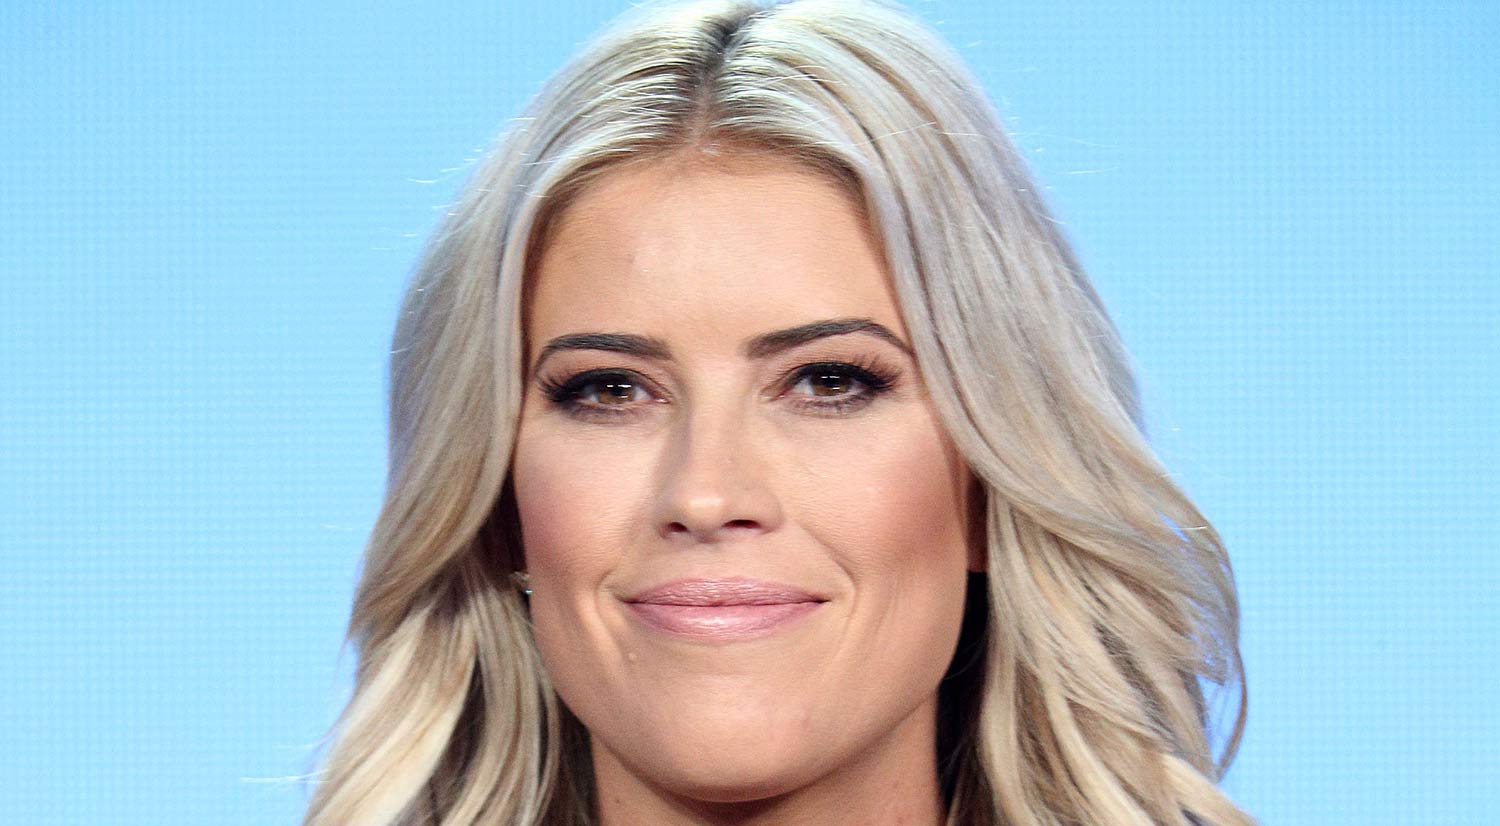 Christina Anstead Gets Candid About Going Through Two Divorces & H...